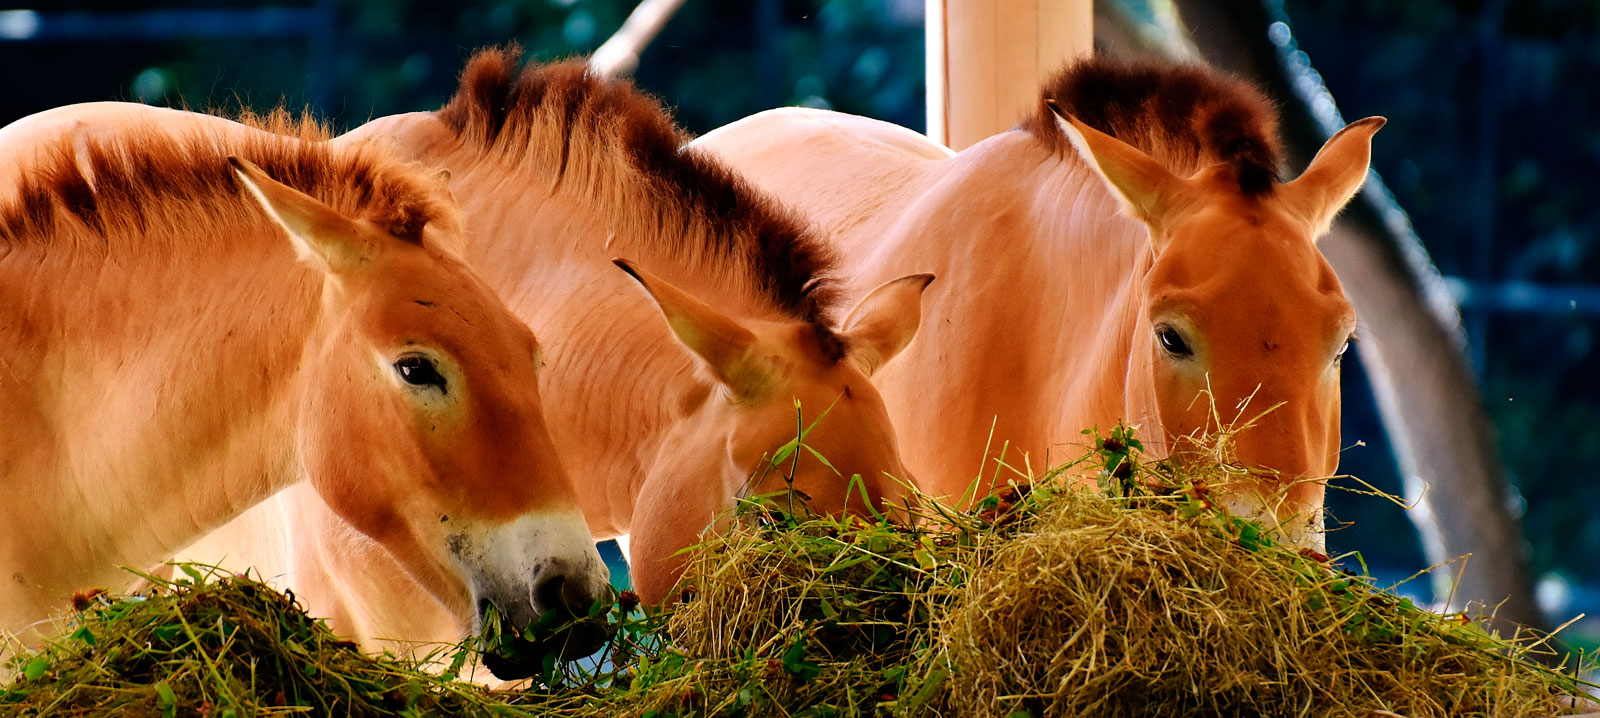 Nutrition in the horses